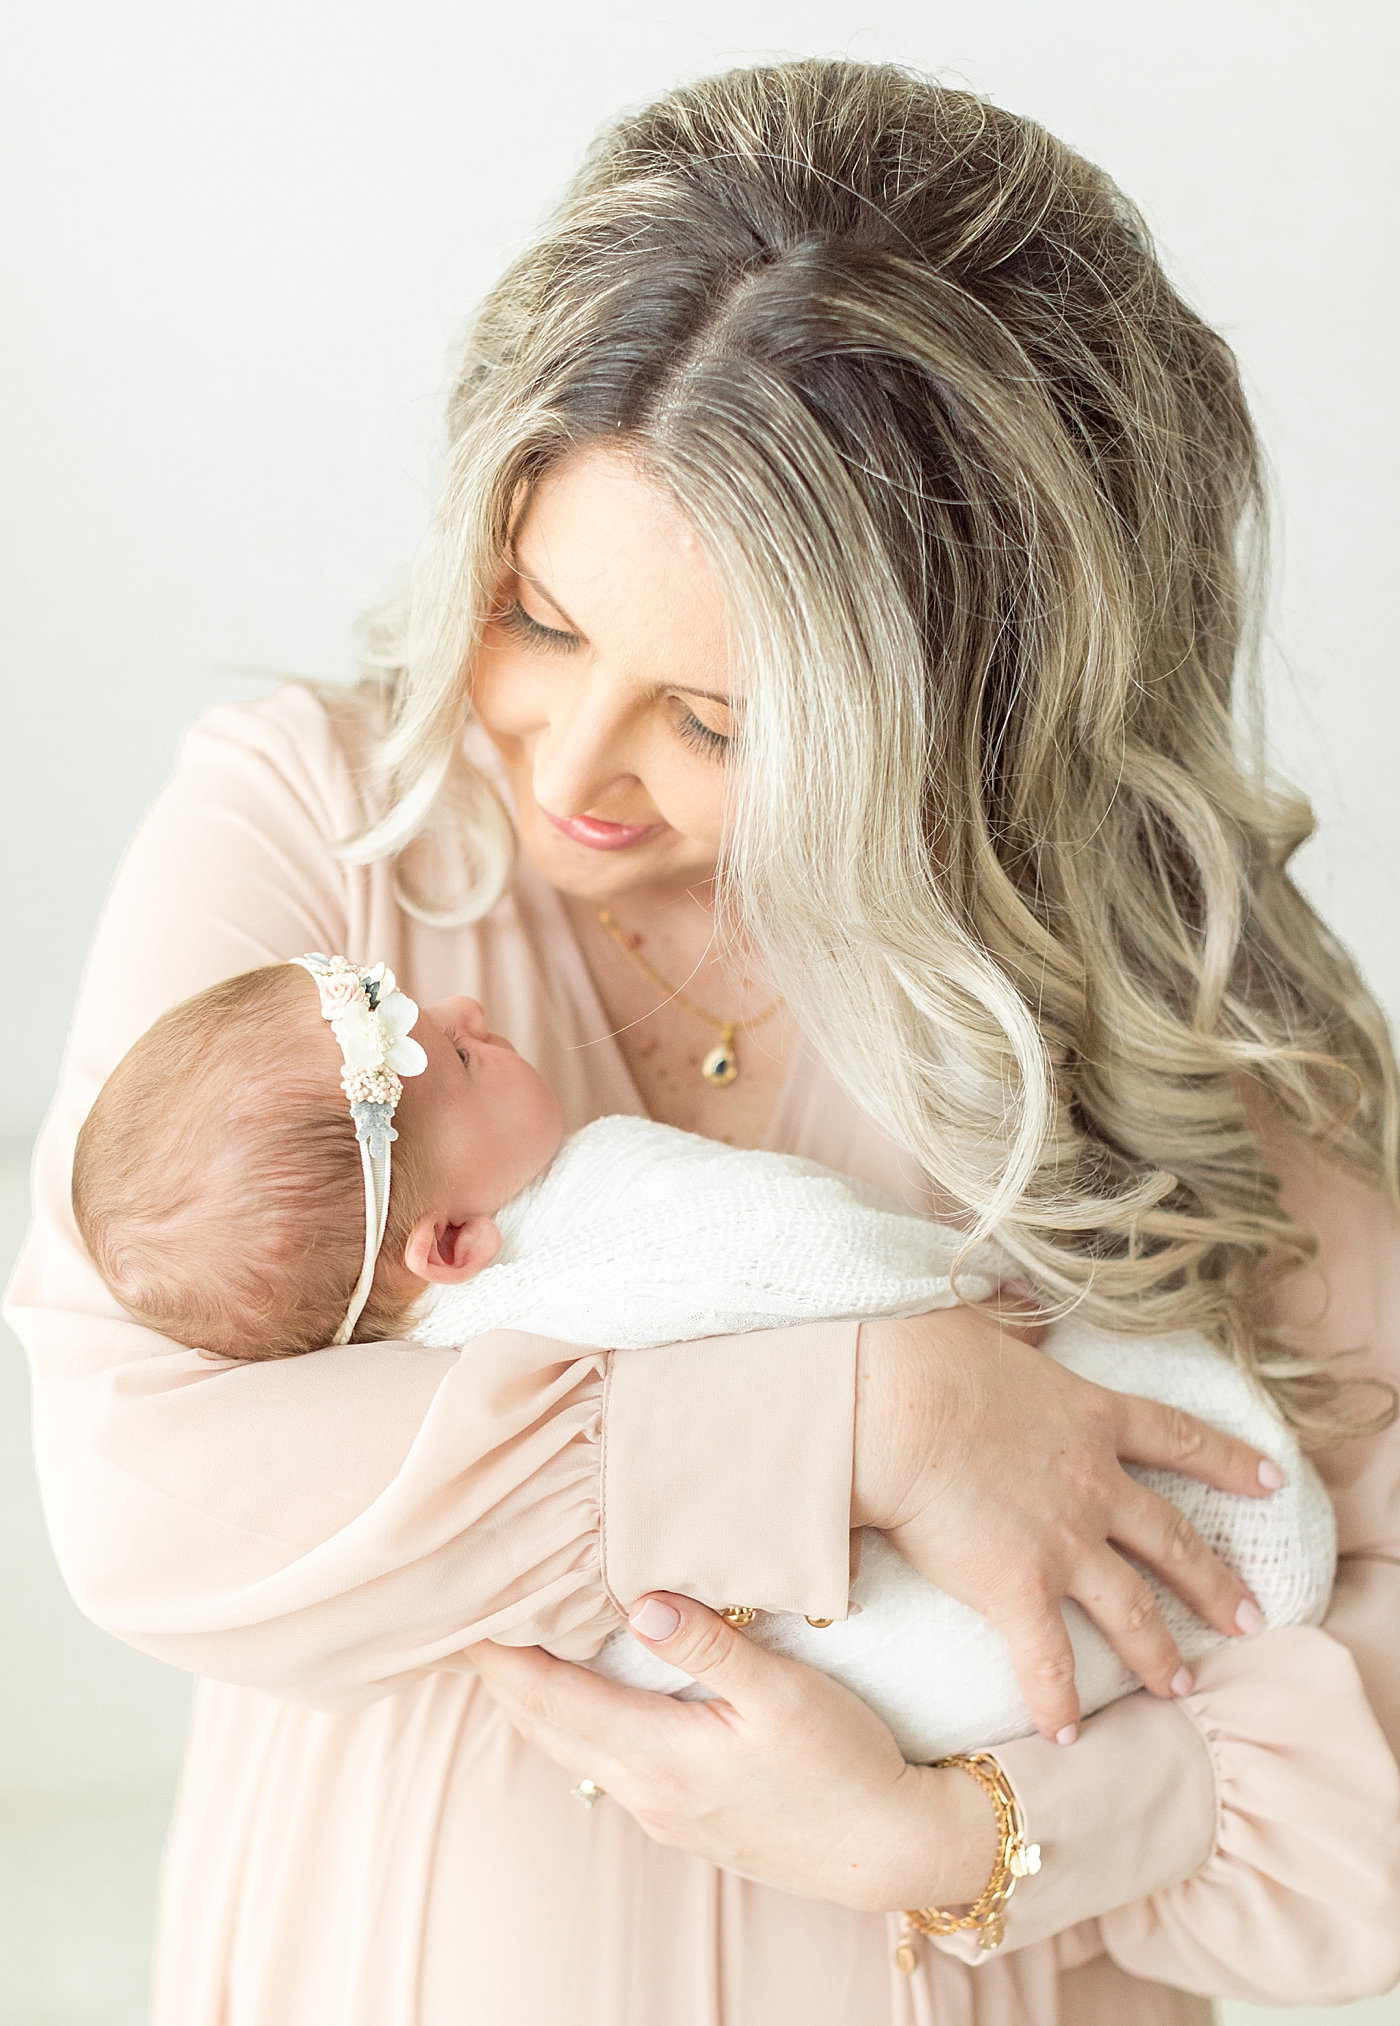 Mom holding her newborn baby girl | Image by Chrissy Winchester